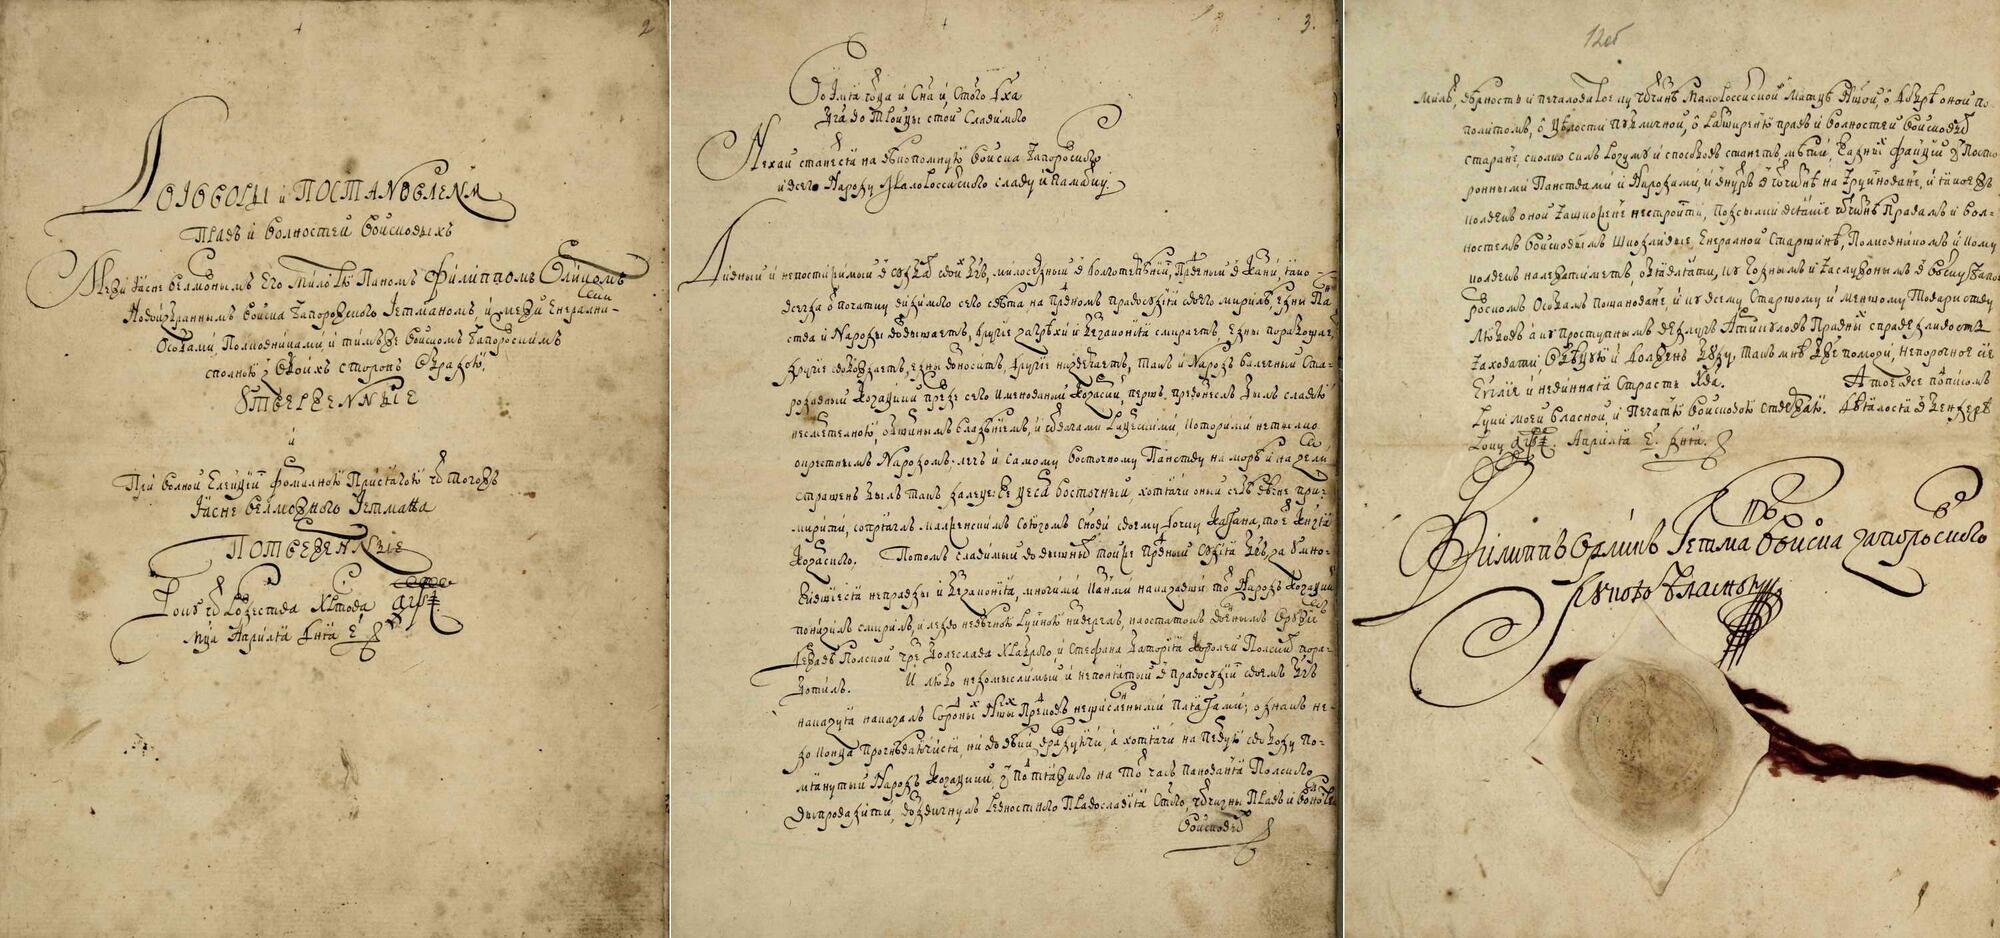 Title, first and last page of the Orlik Constitution